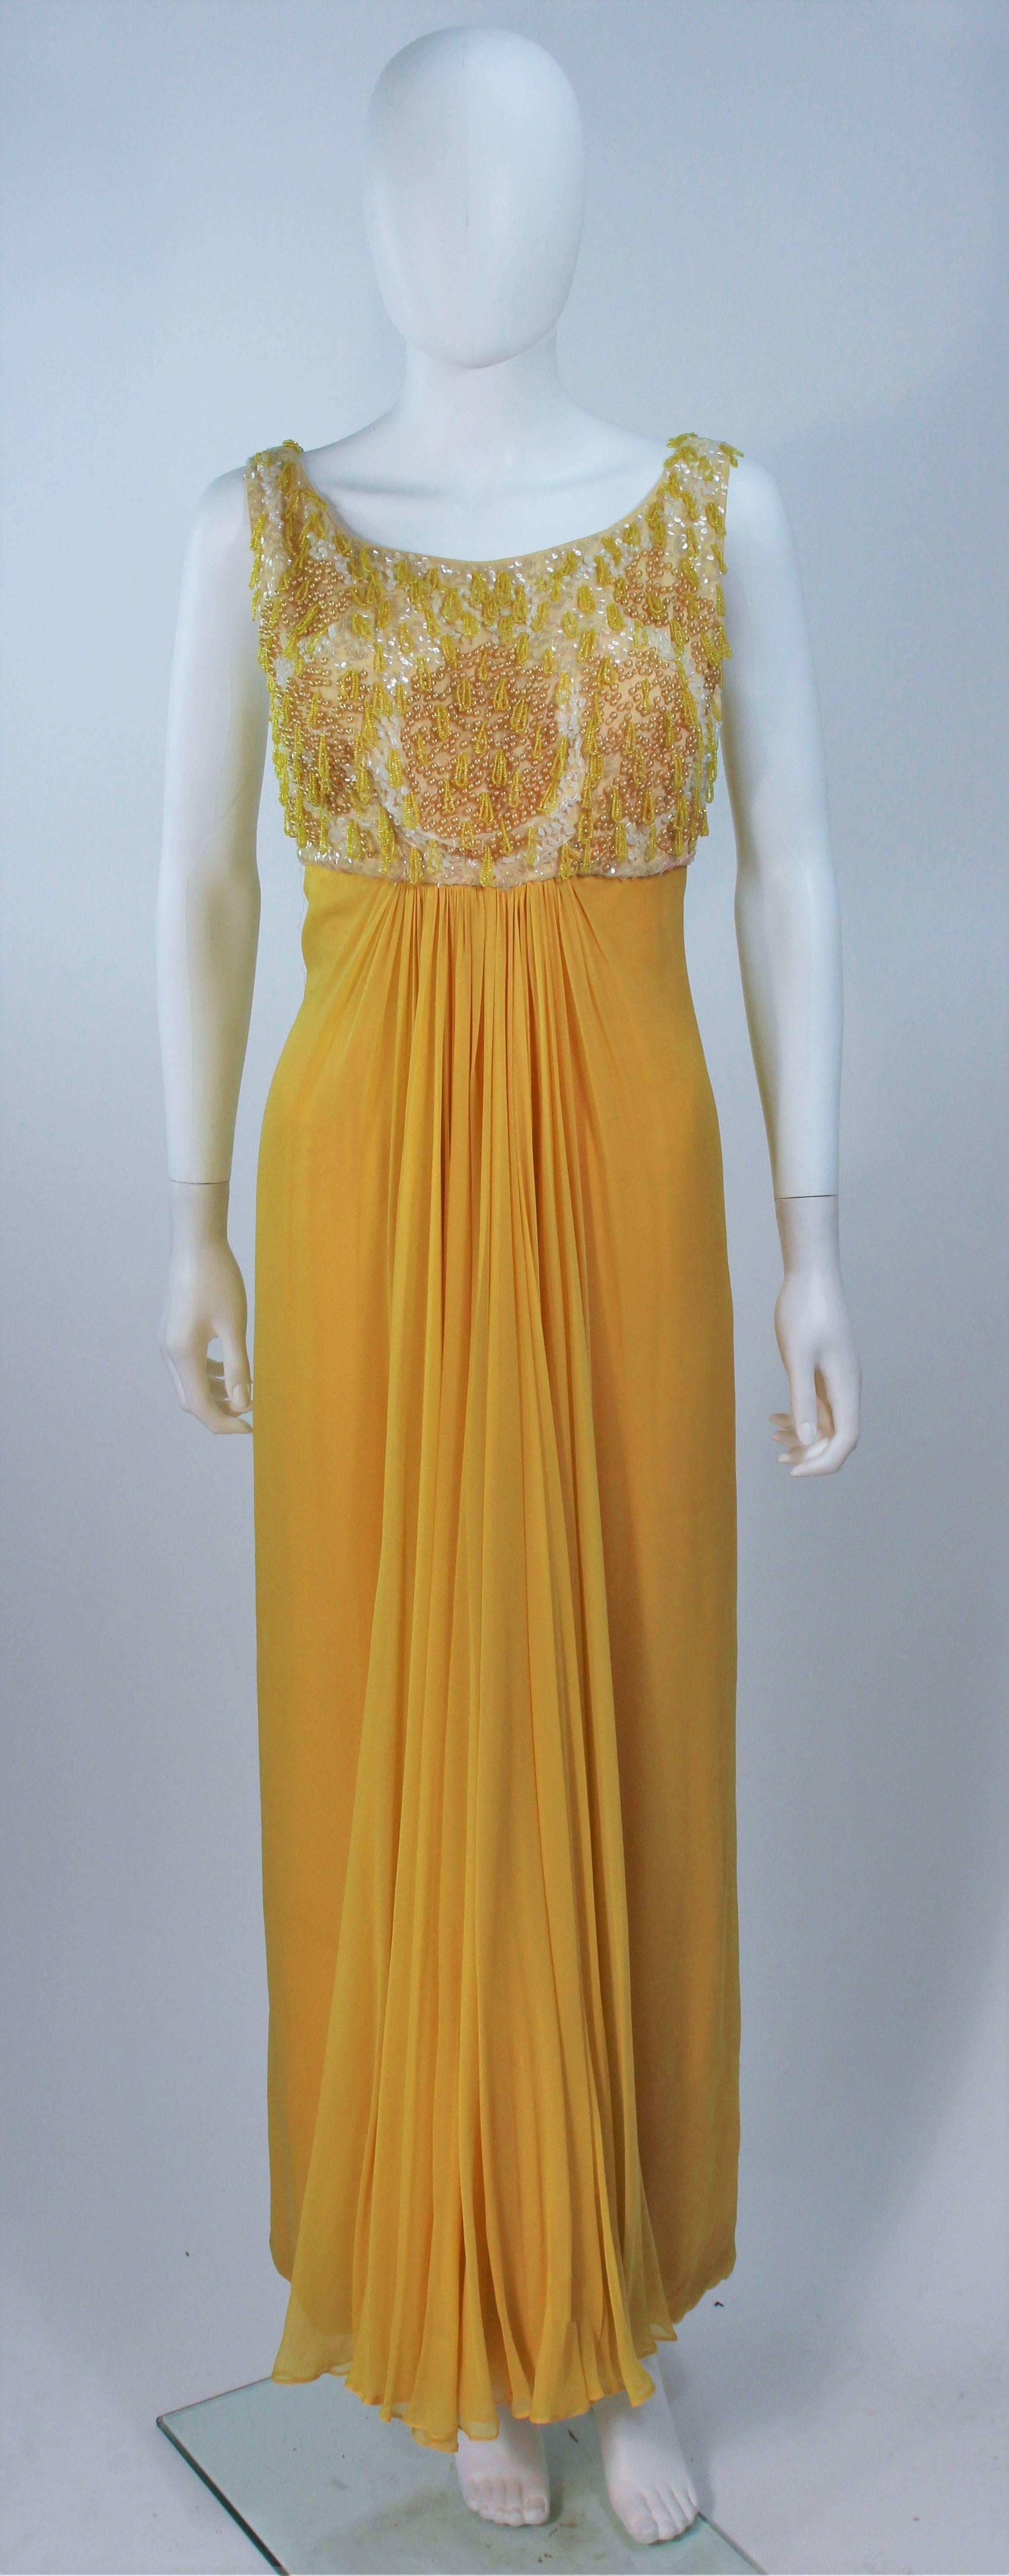  This gown is composed of a yellow chiffon with an embellished bodice. Features a fully boned interior bodice. There is a center back zipper closure. In great vintage condition.

  **Please cross-reference measurements for personal accuracy. Size